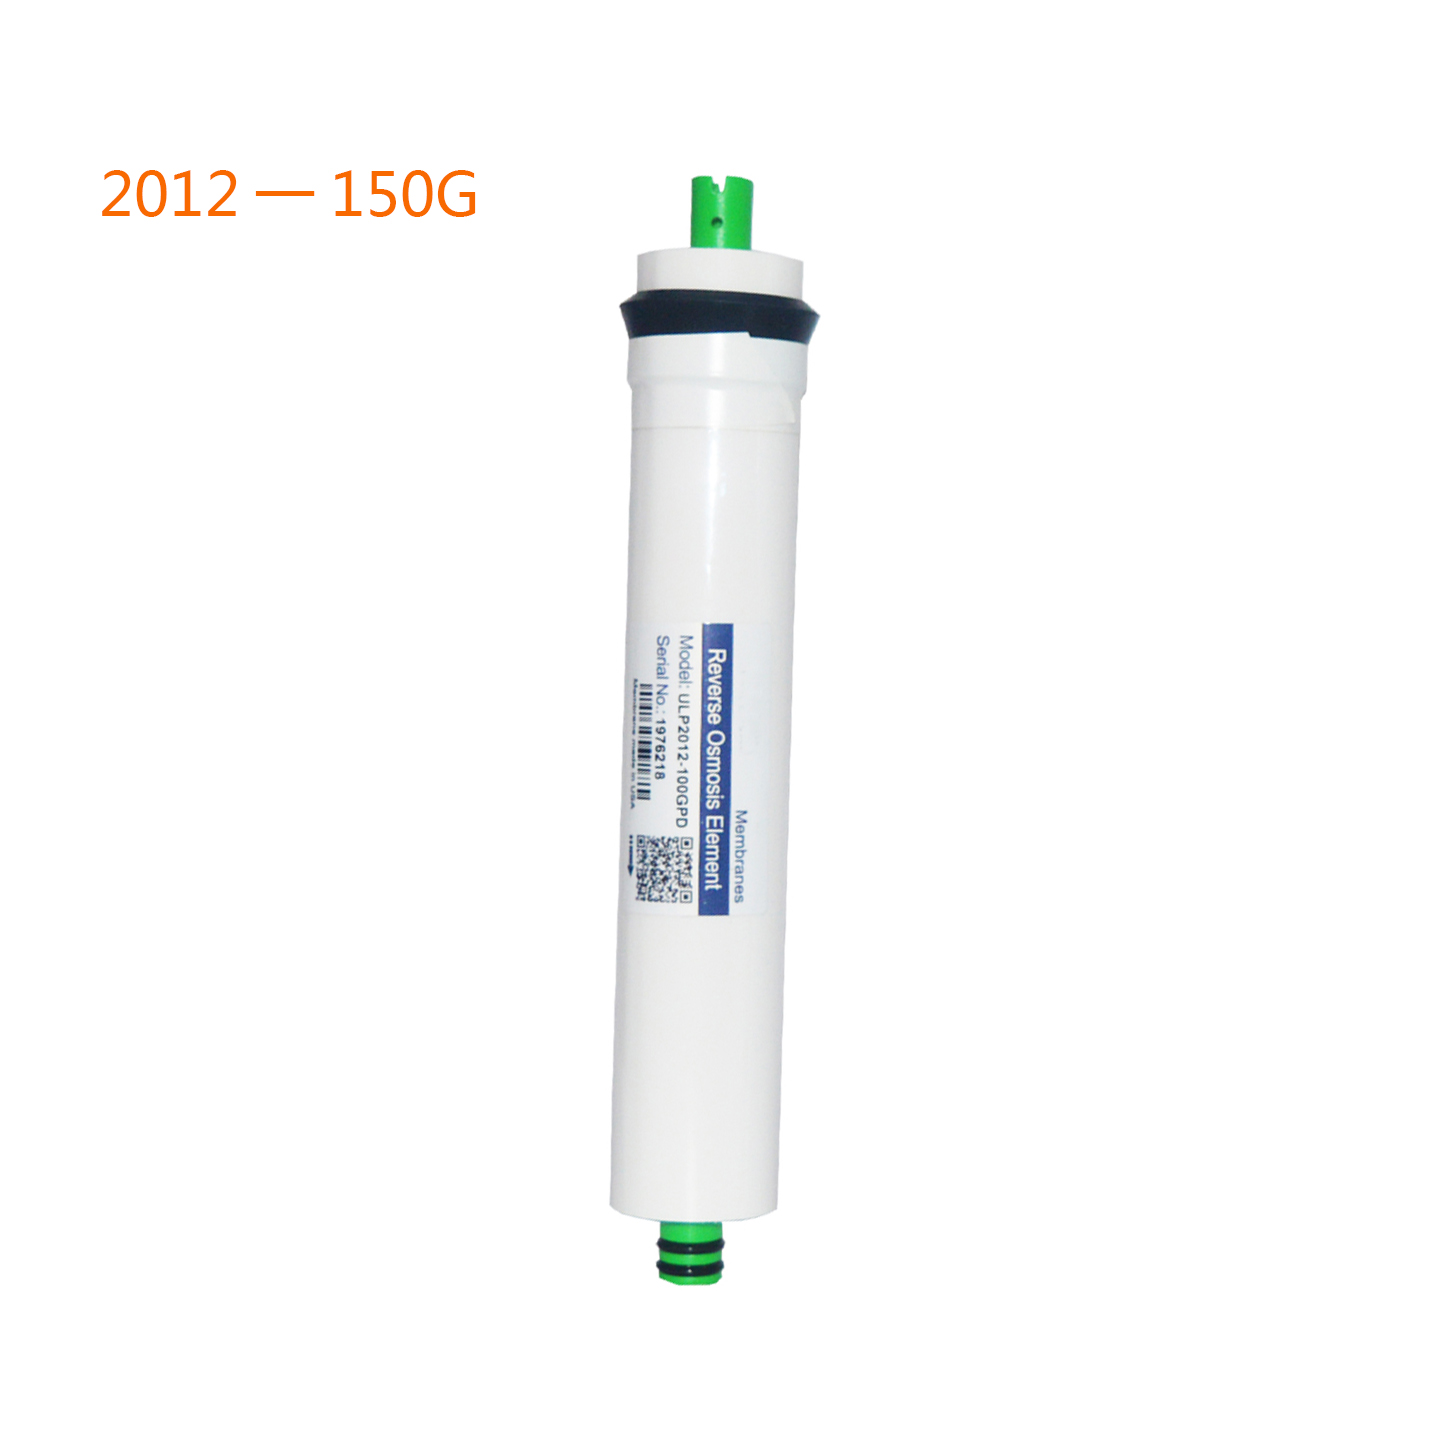 Reverse-Osmosis-Membrane-Replacement-RO-Water-System-Filter-5075100125150400G-1425879-6